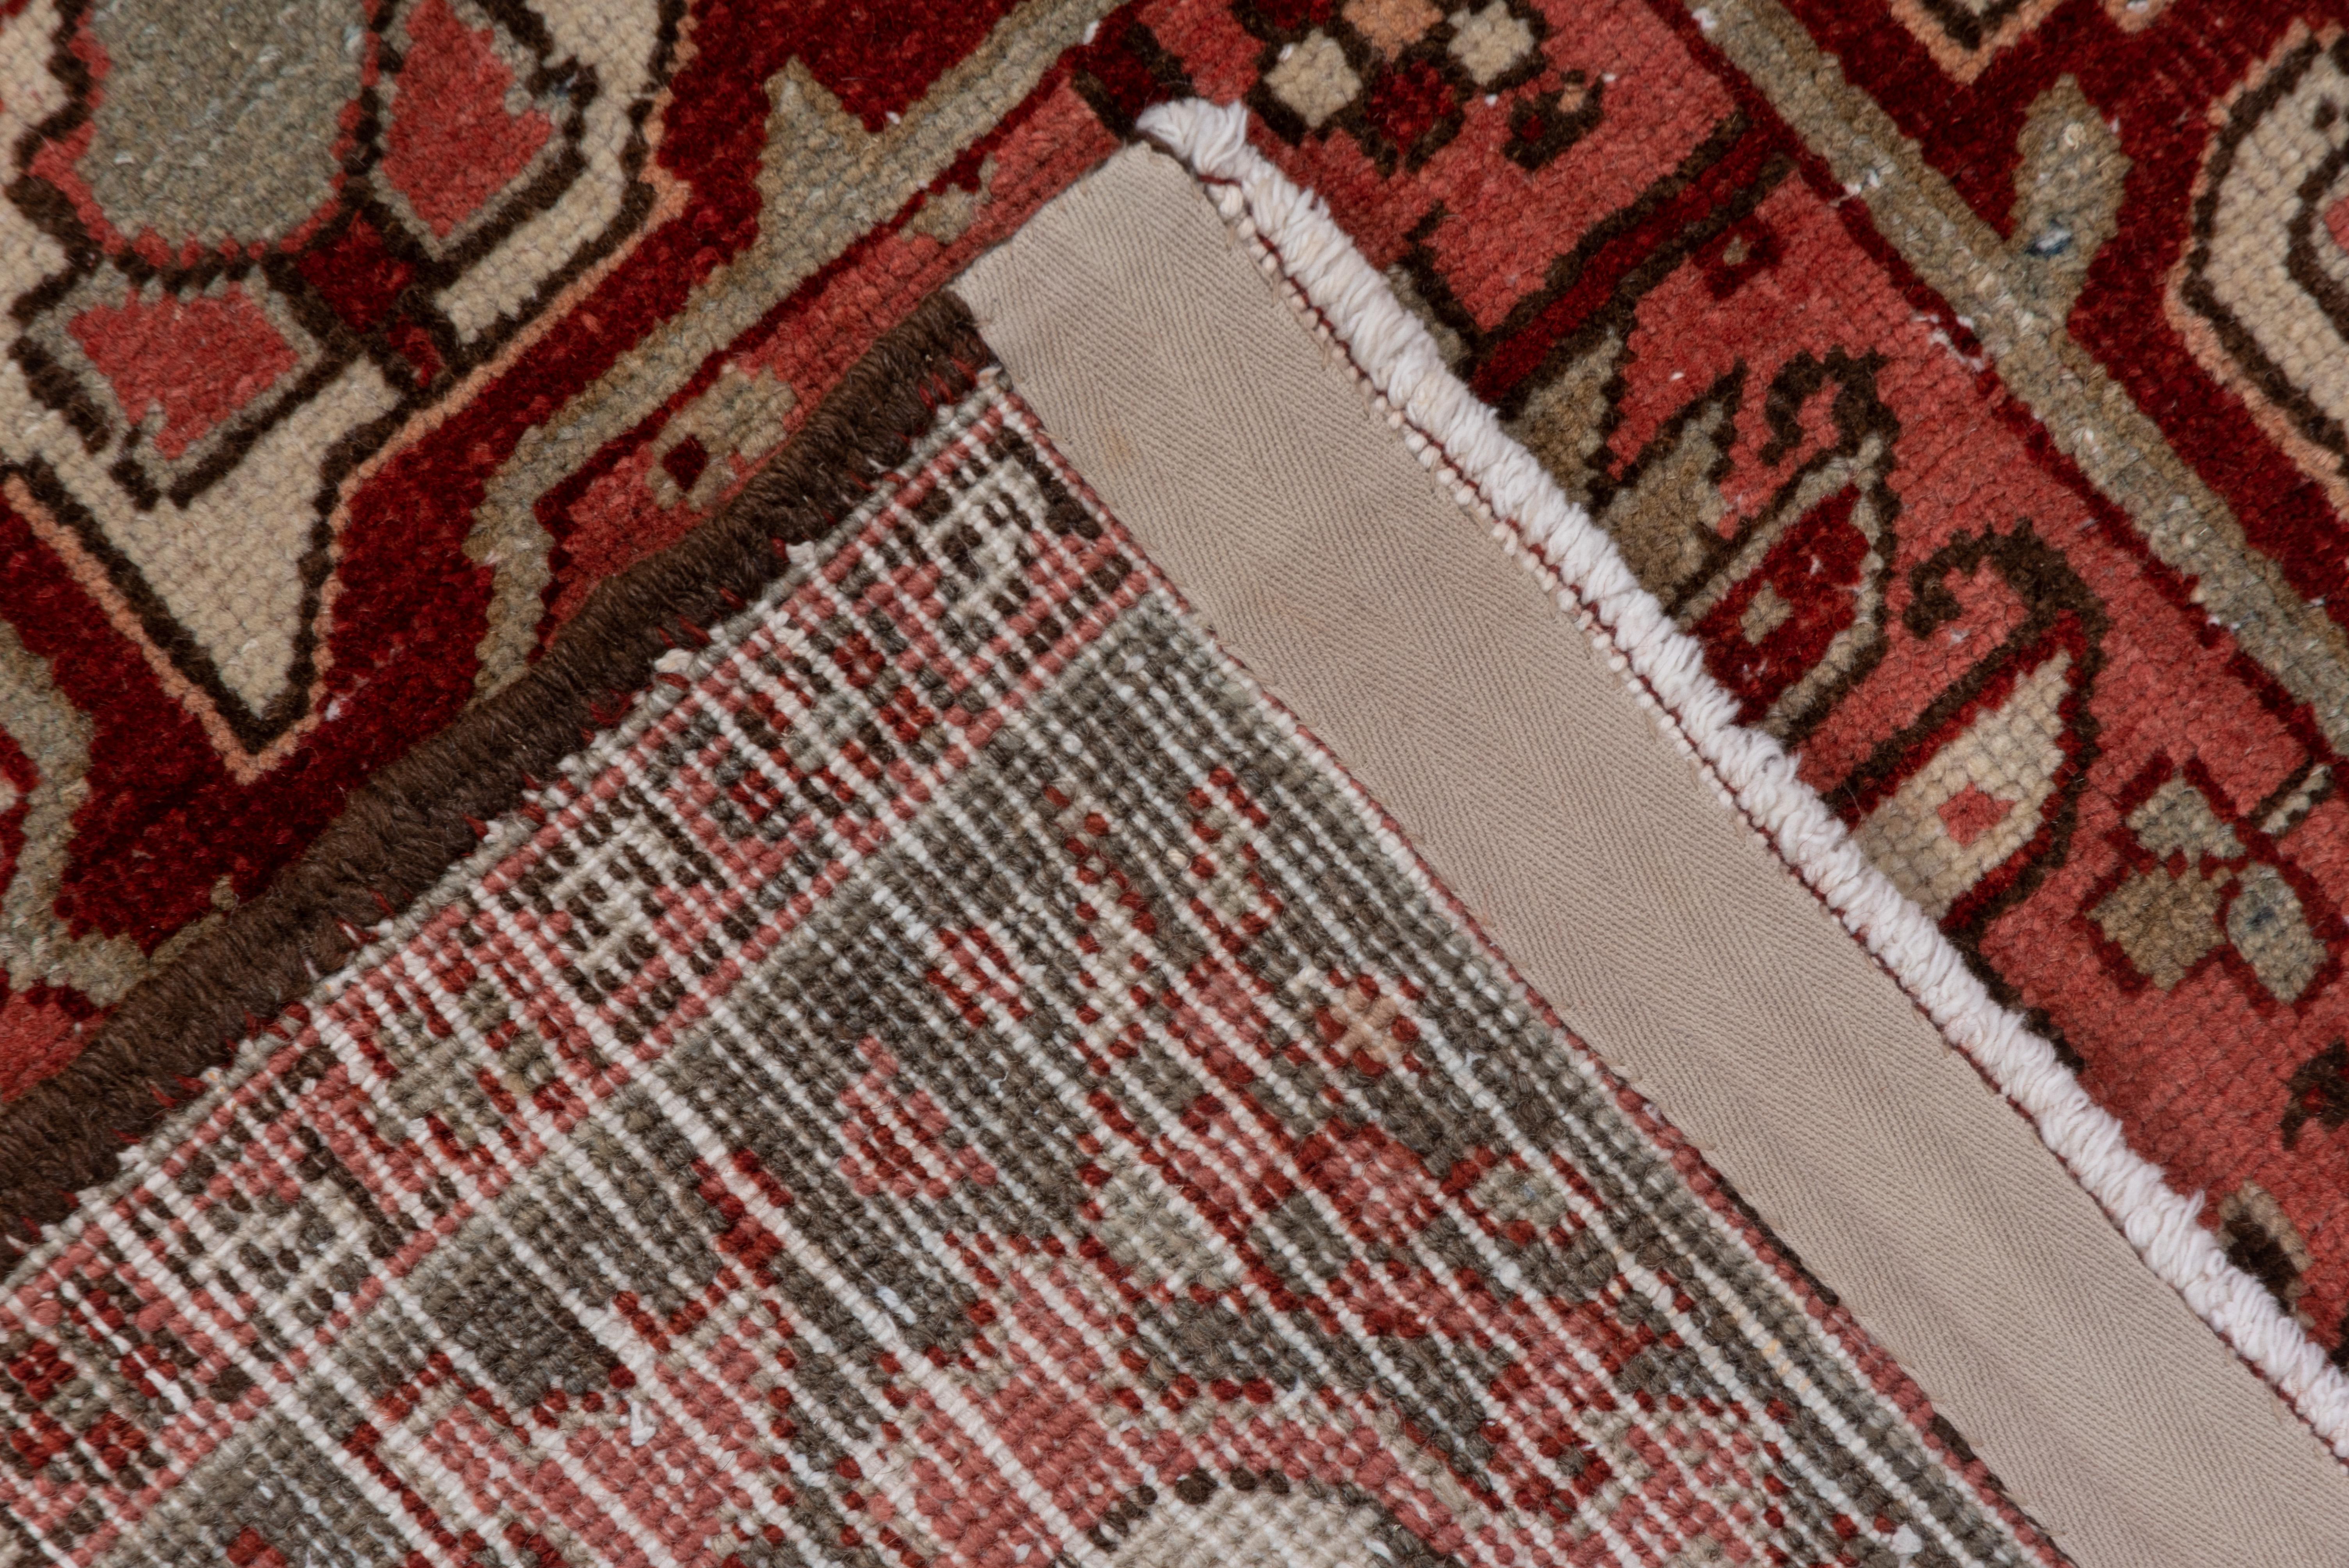 Heriz Rugs are woven in the Northwest region of Iran. They’re known for their durable wool quality, and geometric designs. They have a heavy influence of the geometry of Caucasian rugs of Caucasus which is just North of Iran. All Caucasian rugs are